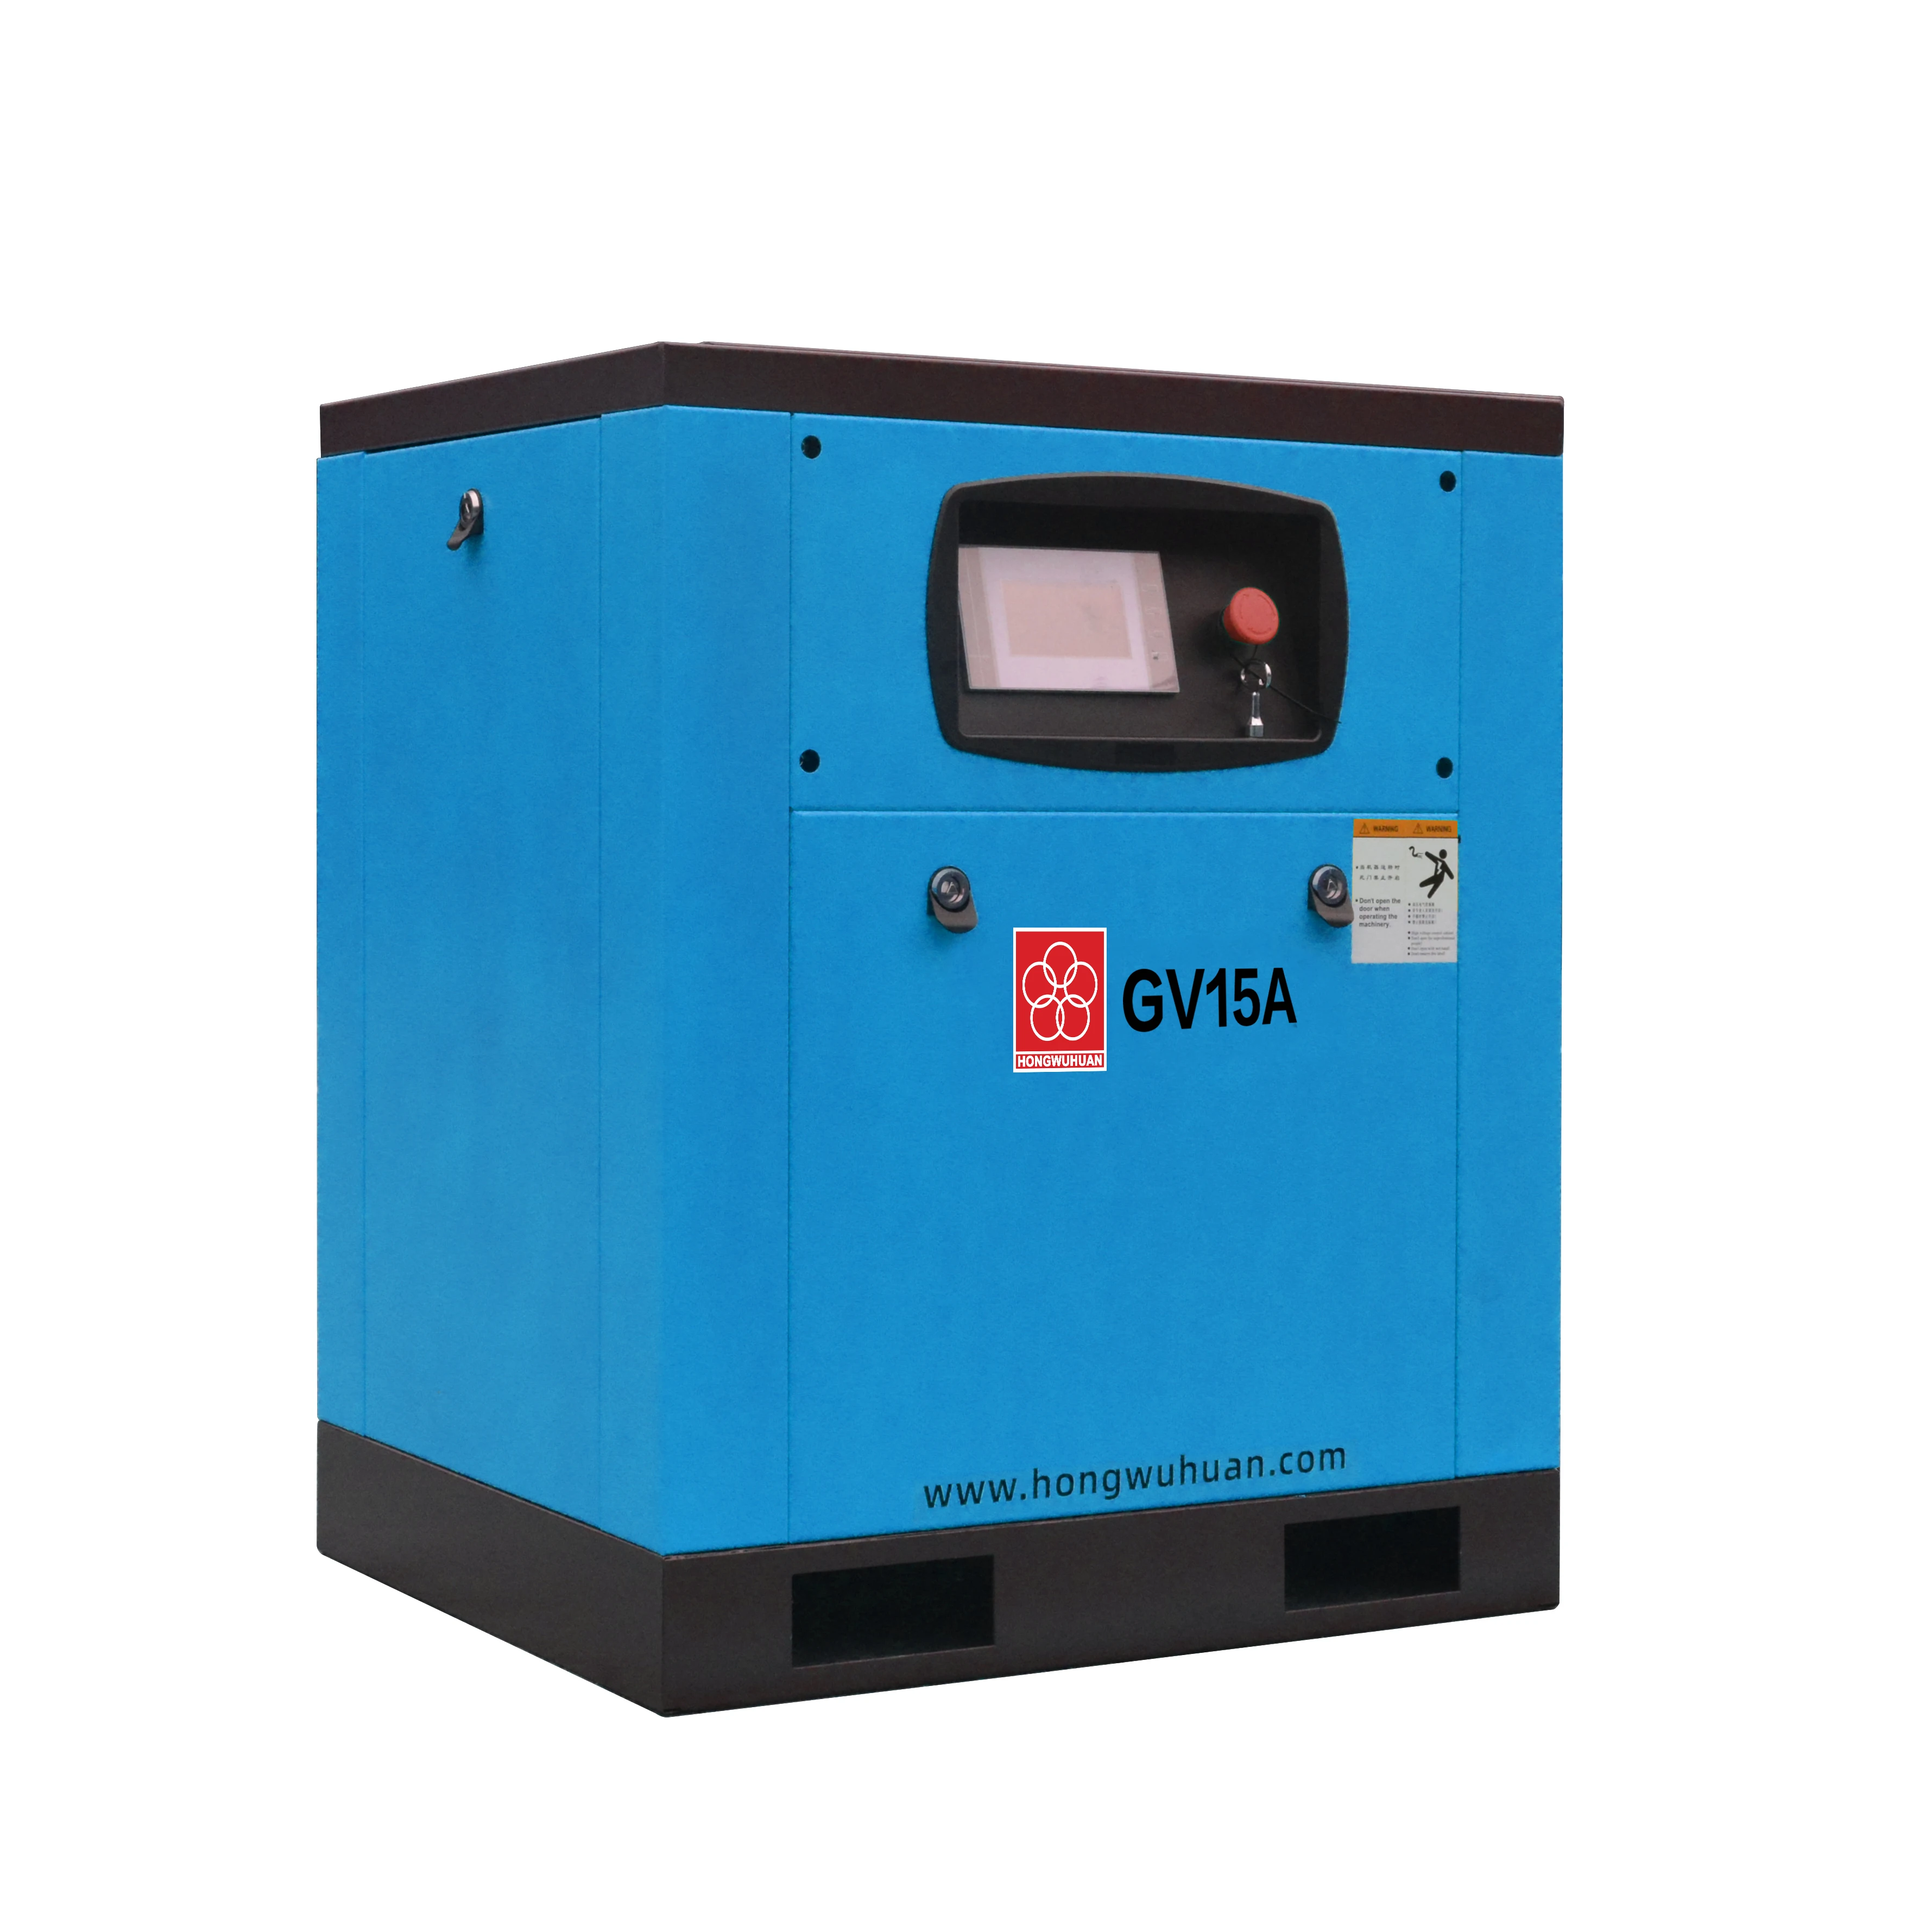 Hongwuhuan GV15 Electric Screw Air Compressor Good Quality New Condition 8 Bar Working Pressure